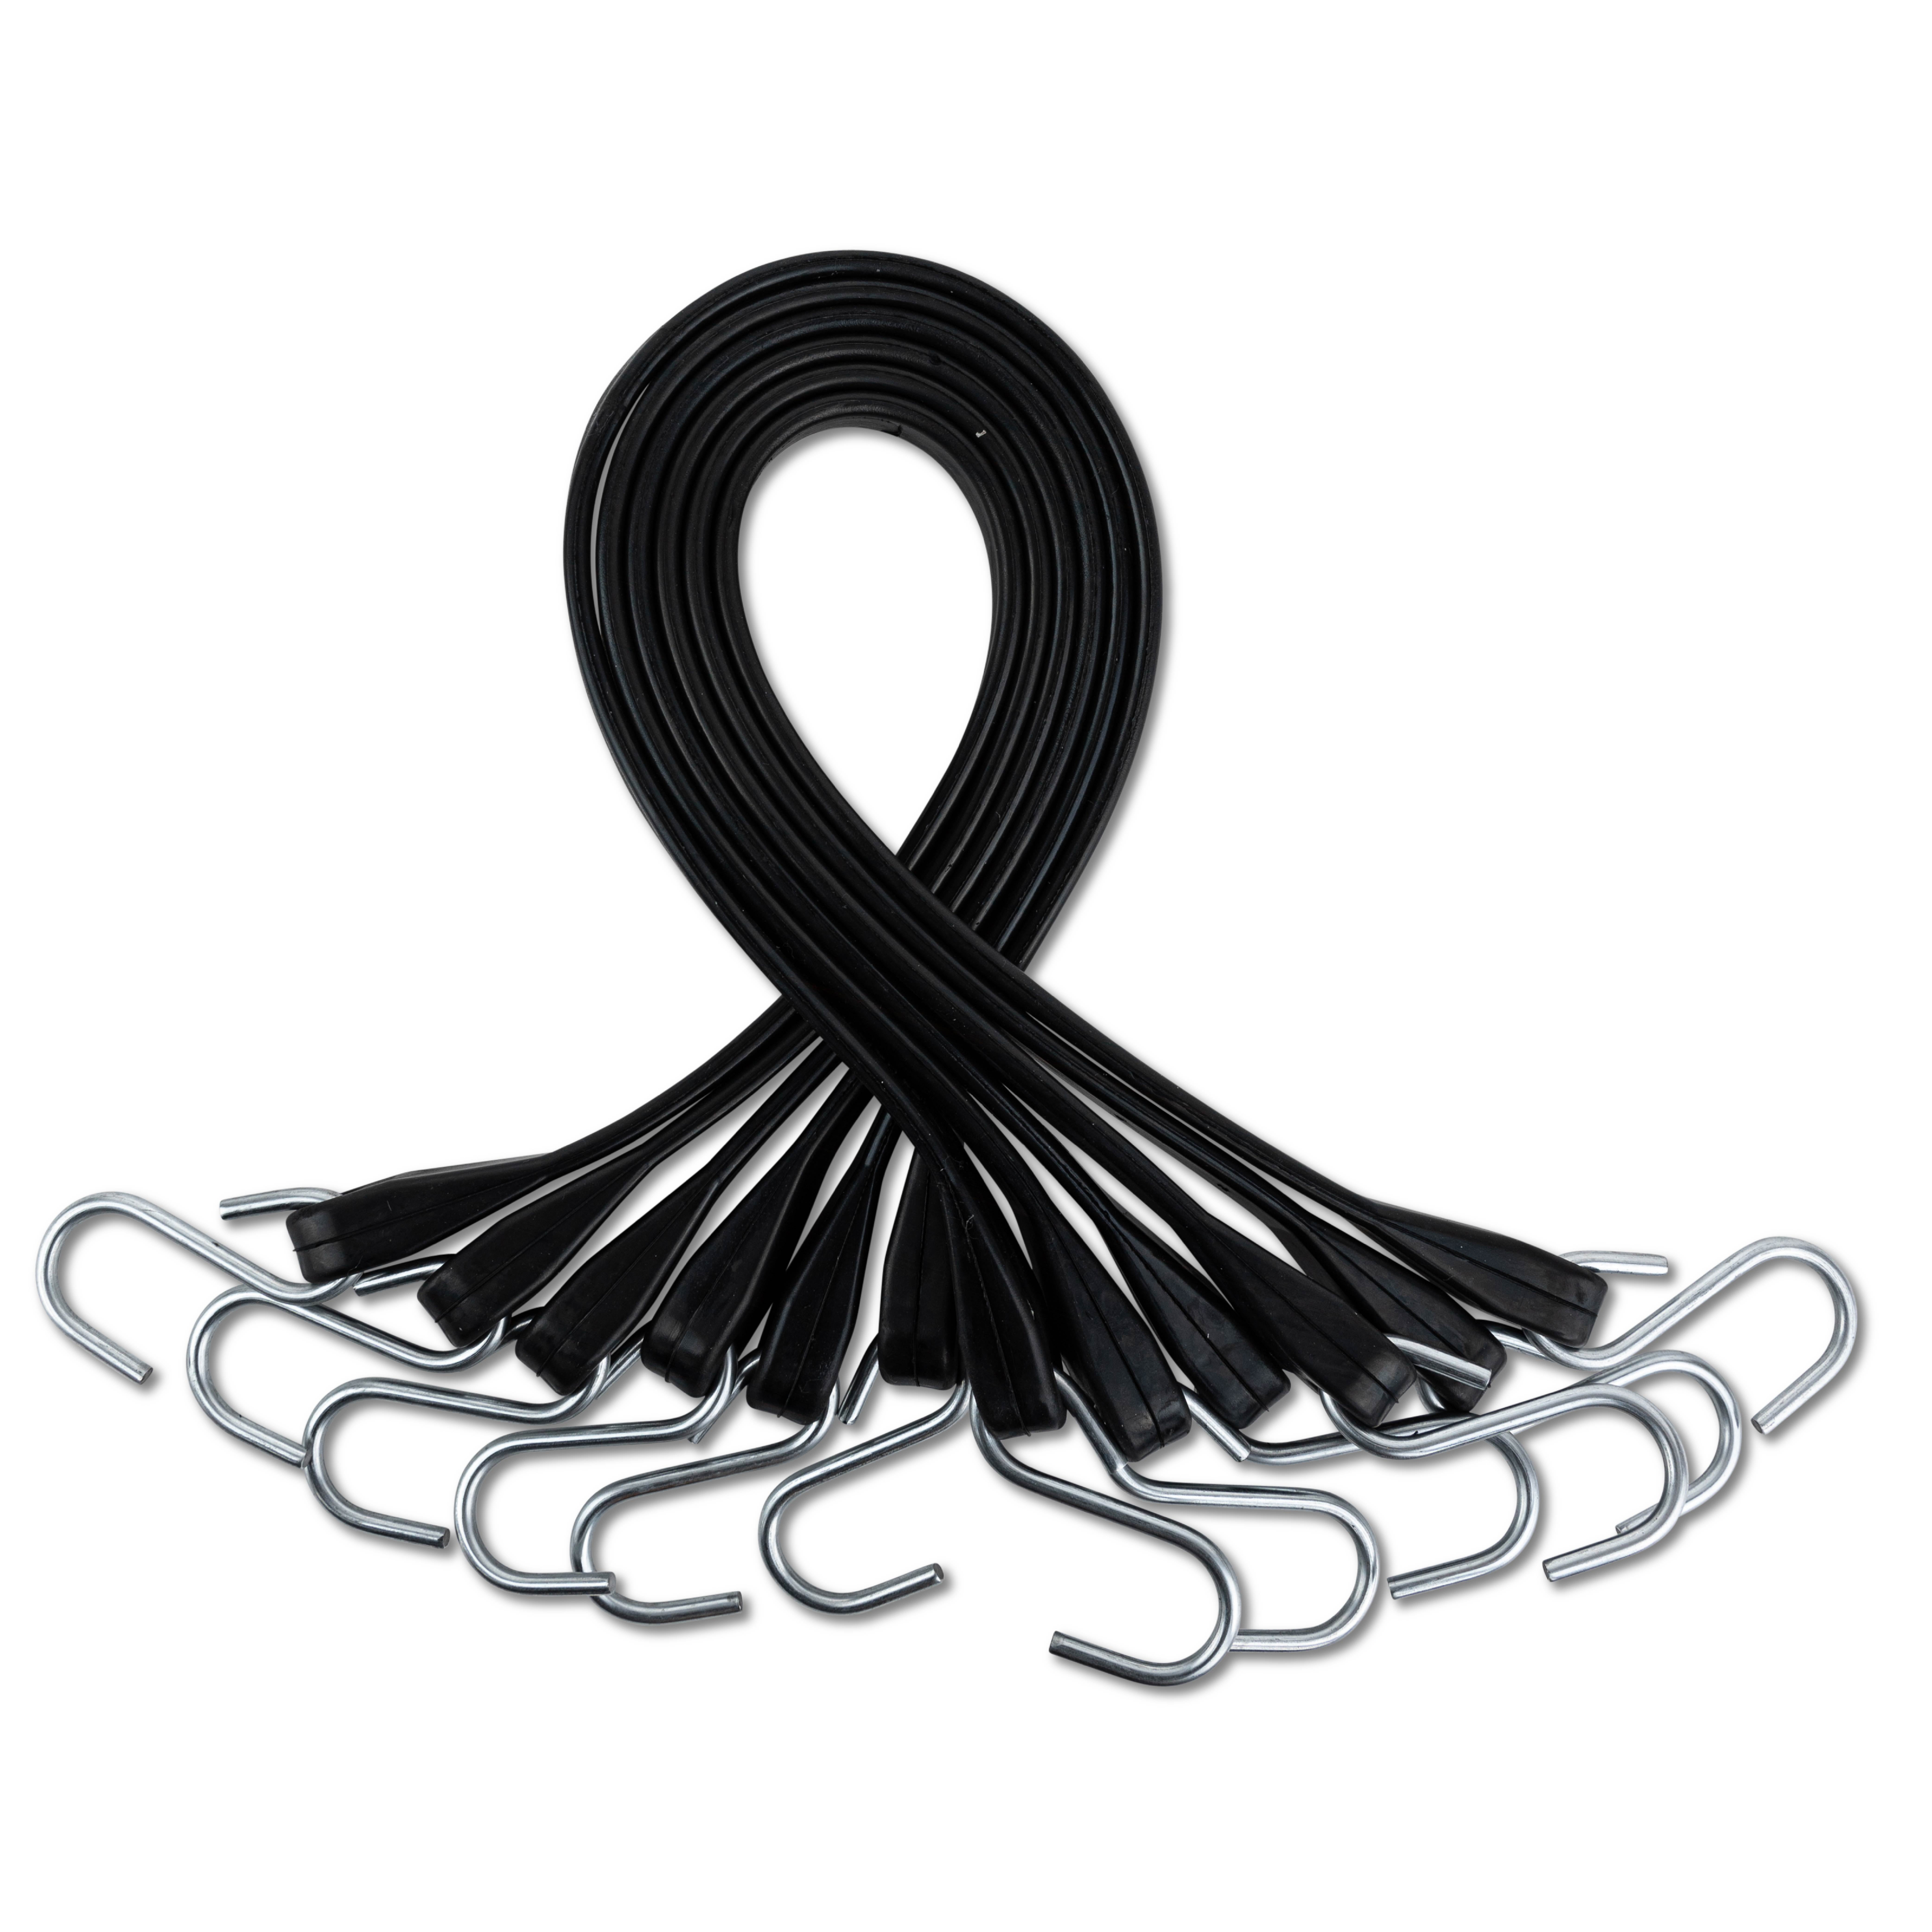 BUNGEE CORD BLACK RUBBER 12, 18, 24, 36 INCHES – PJ Gaffers Expendables